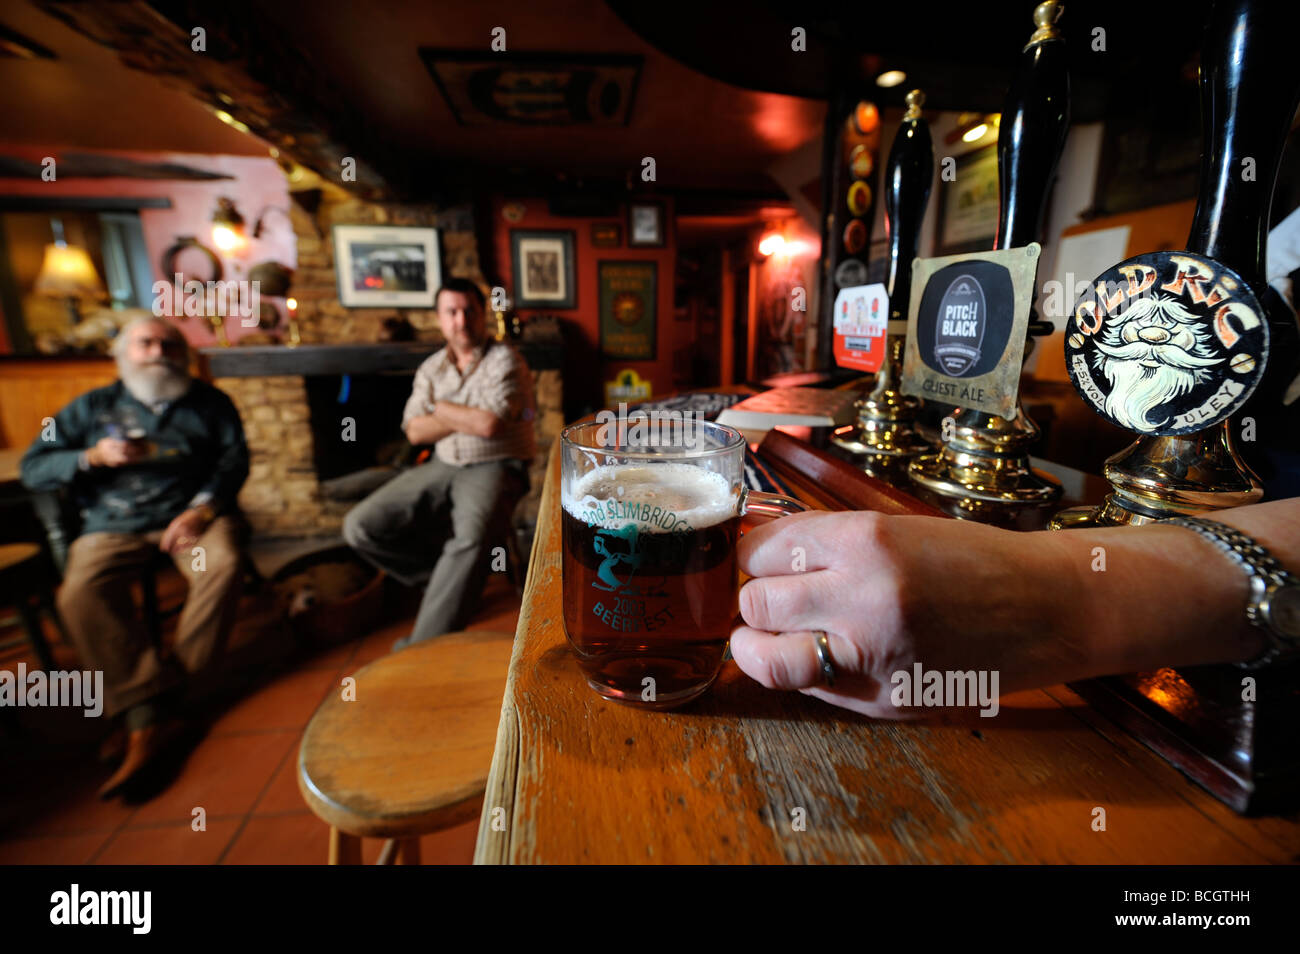 TWO MEN SIT BY AN OPEN FIRE IN A TRADITIONAL PUB AS THE LANDLADY PLACES A PINT OF ALE ON THE BAR GLOUCESTERSHIRE ENGLAND UK Stock Photo